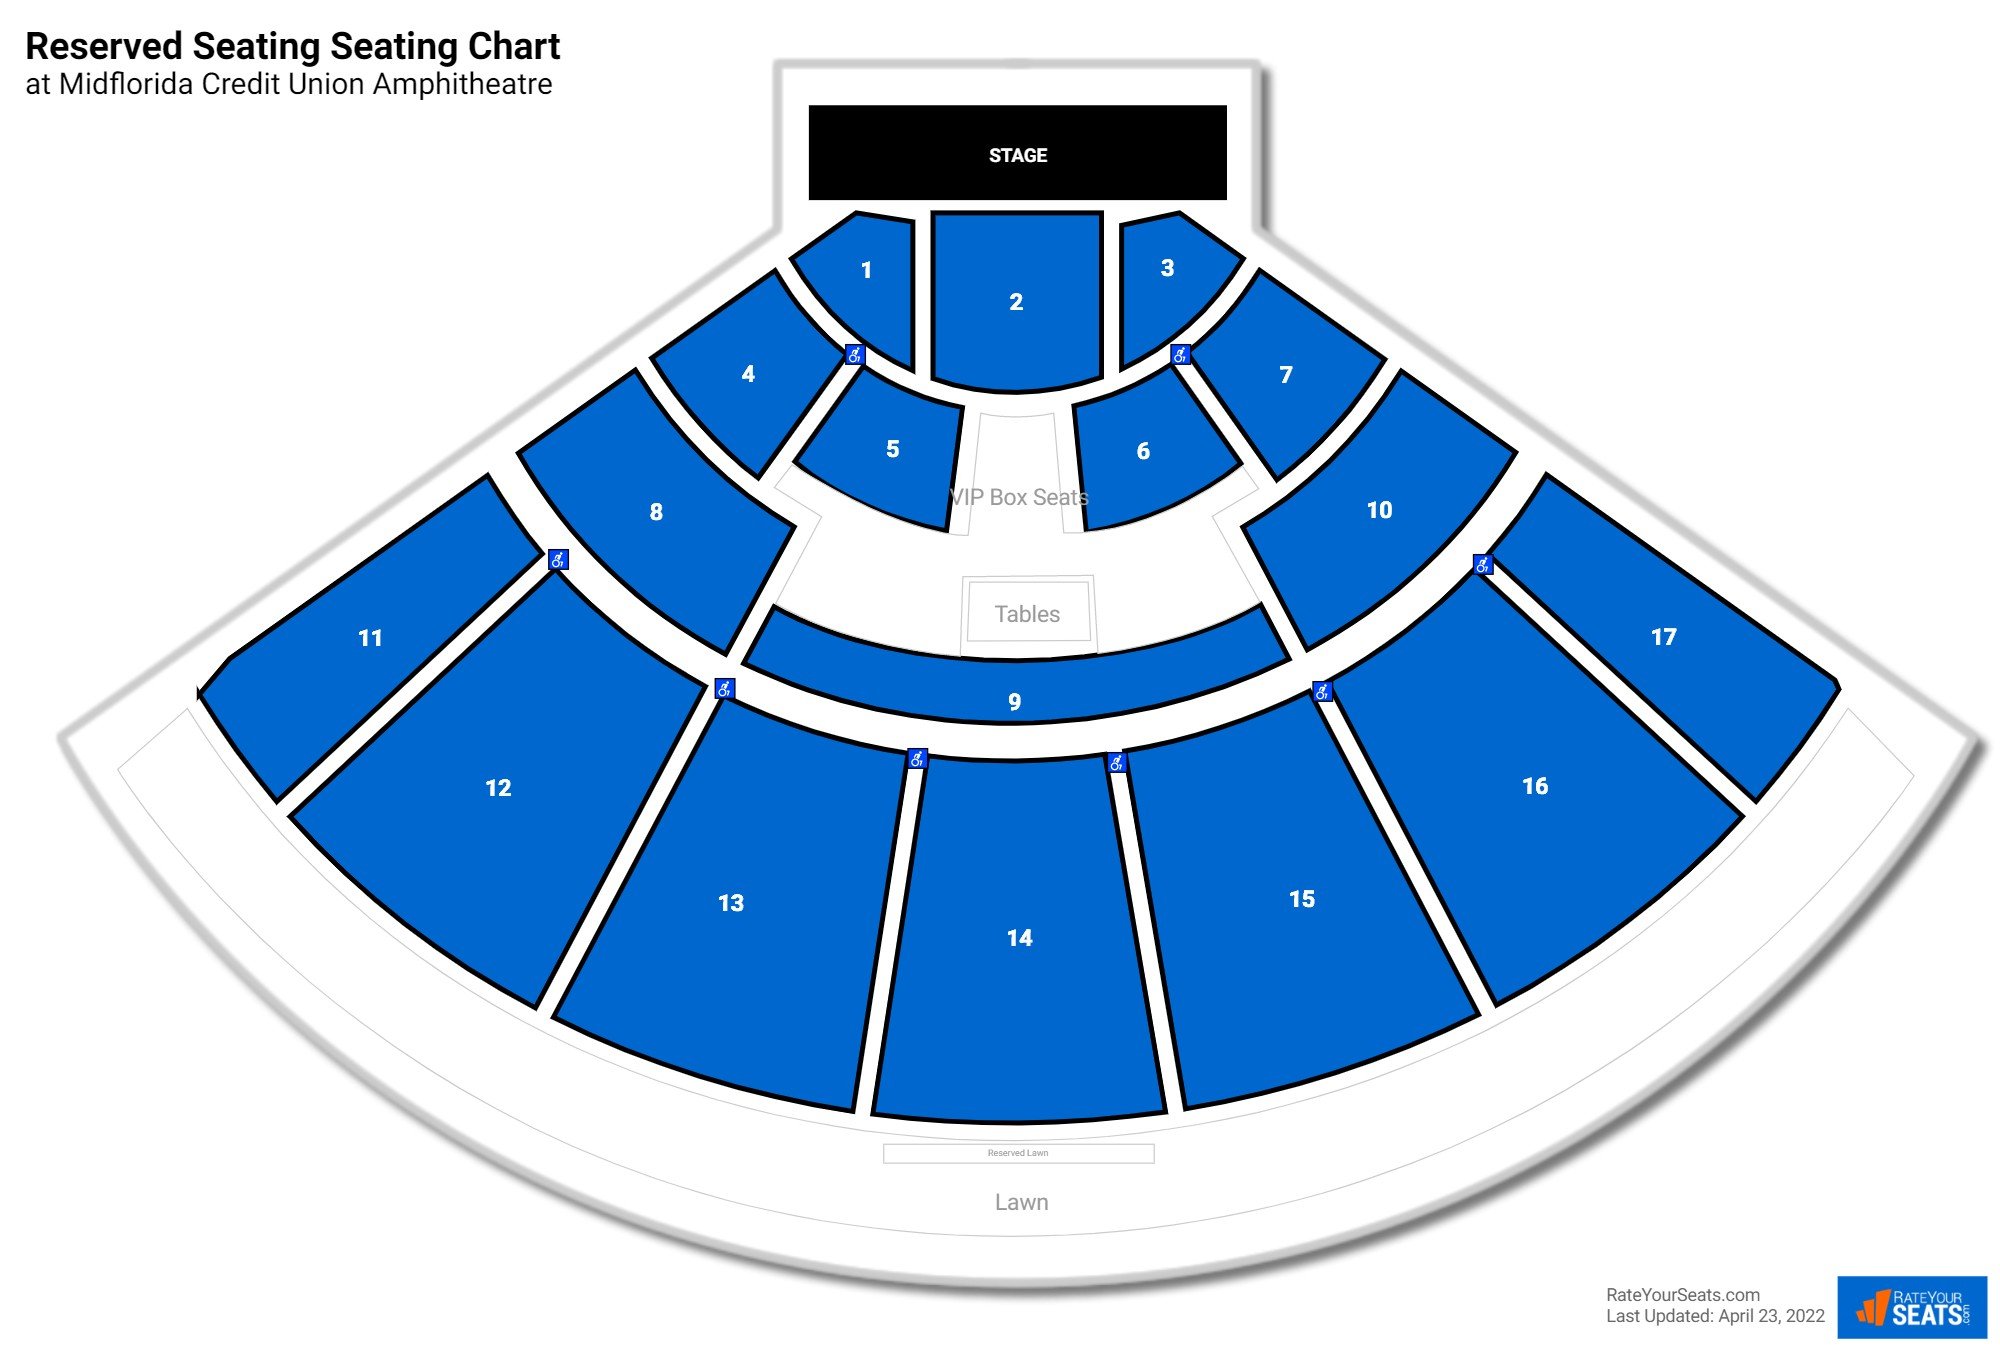 Concert Reserved Seating Seating Chart at Midflorida Credit Union Amphitheatre